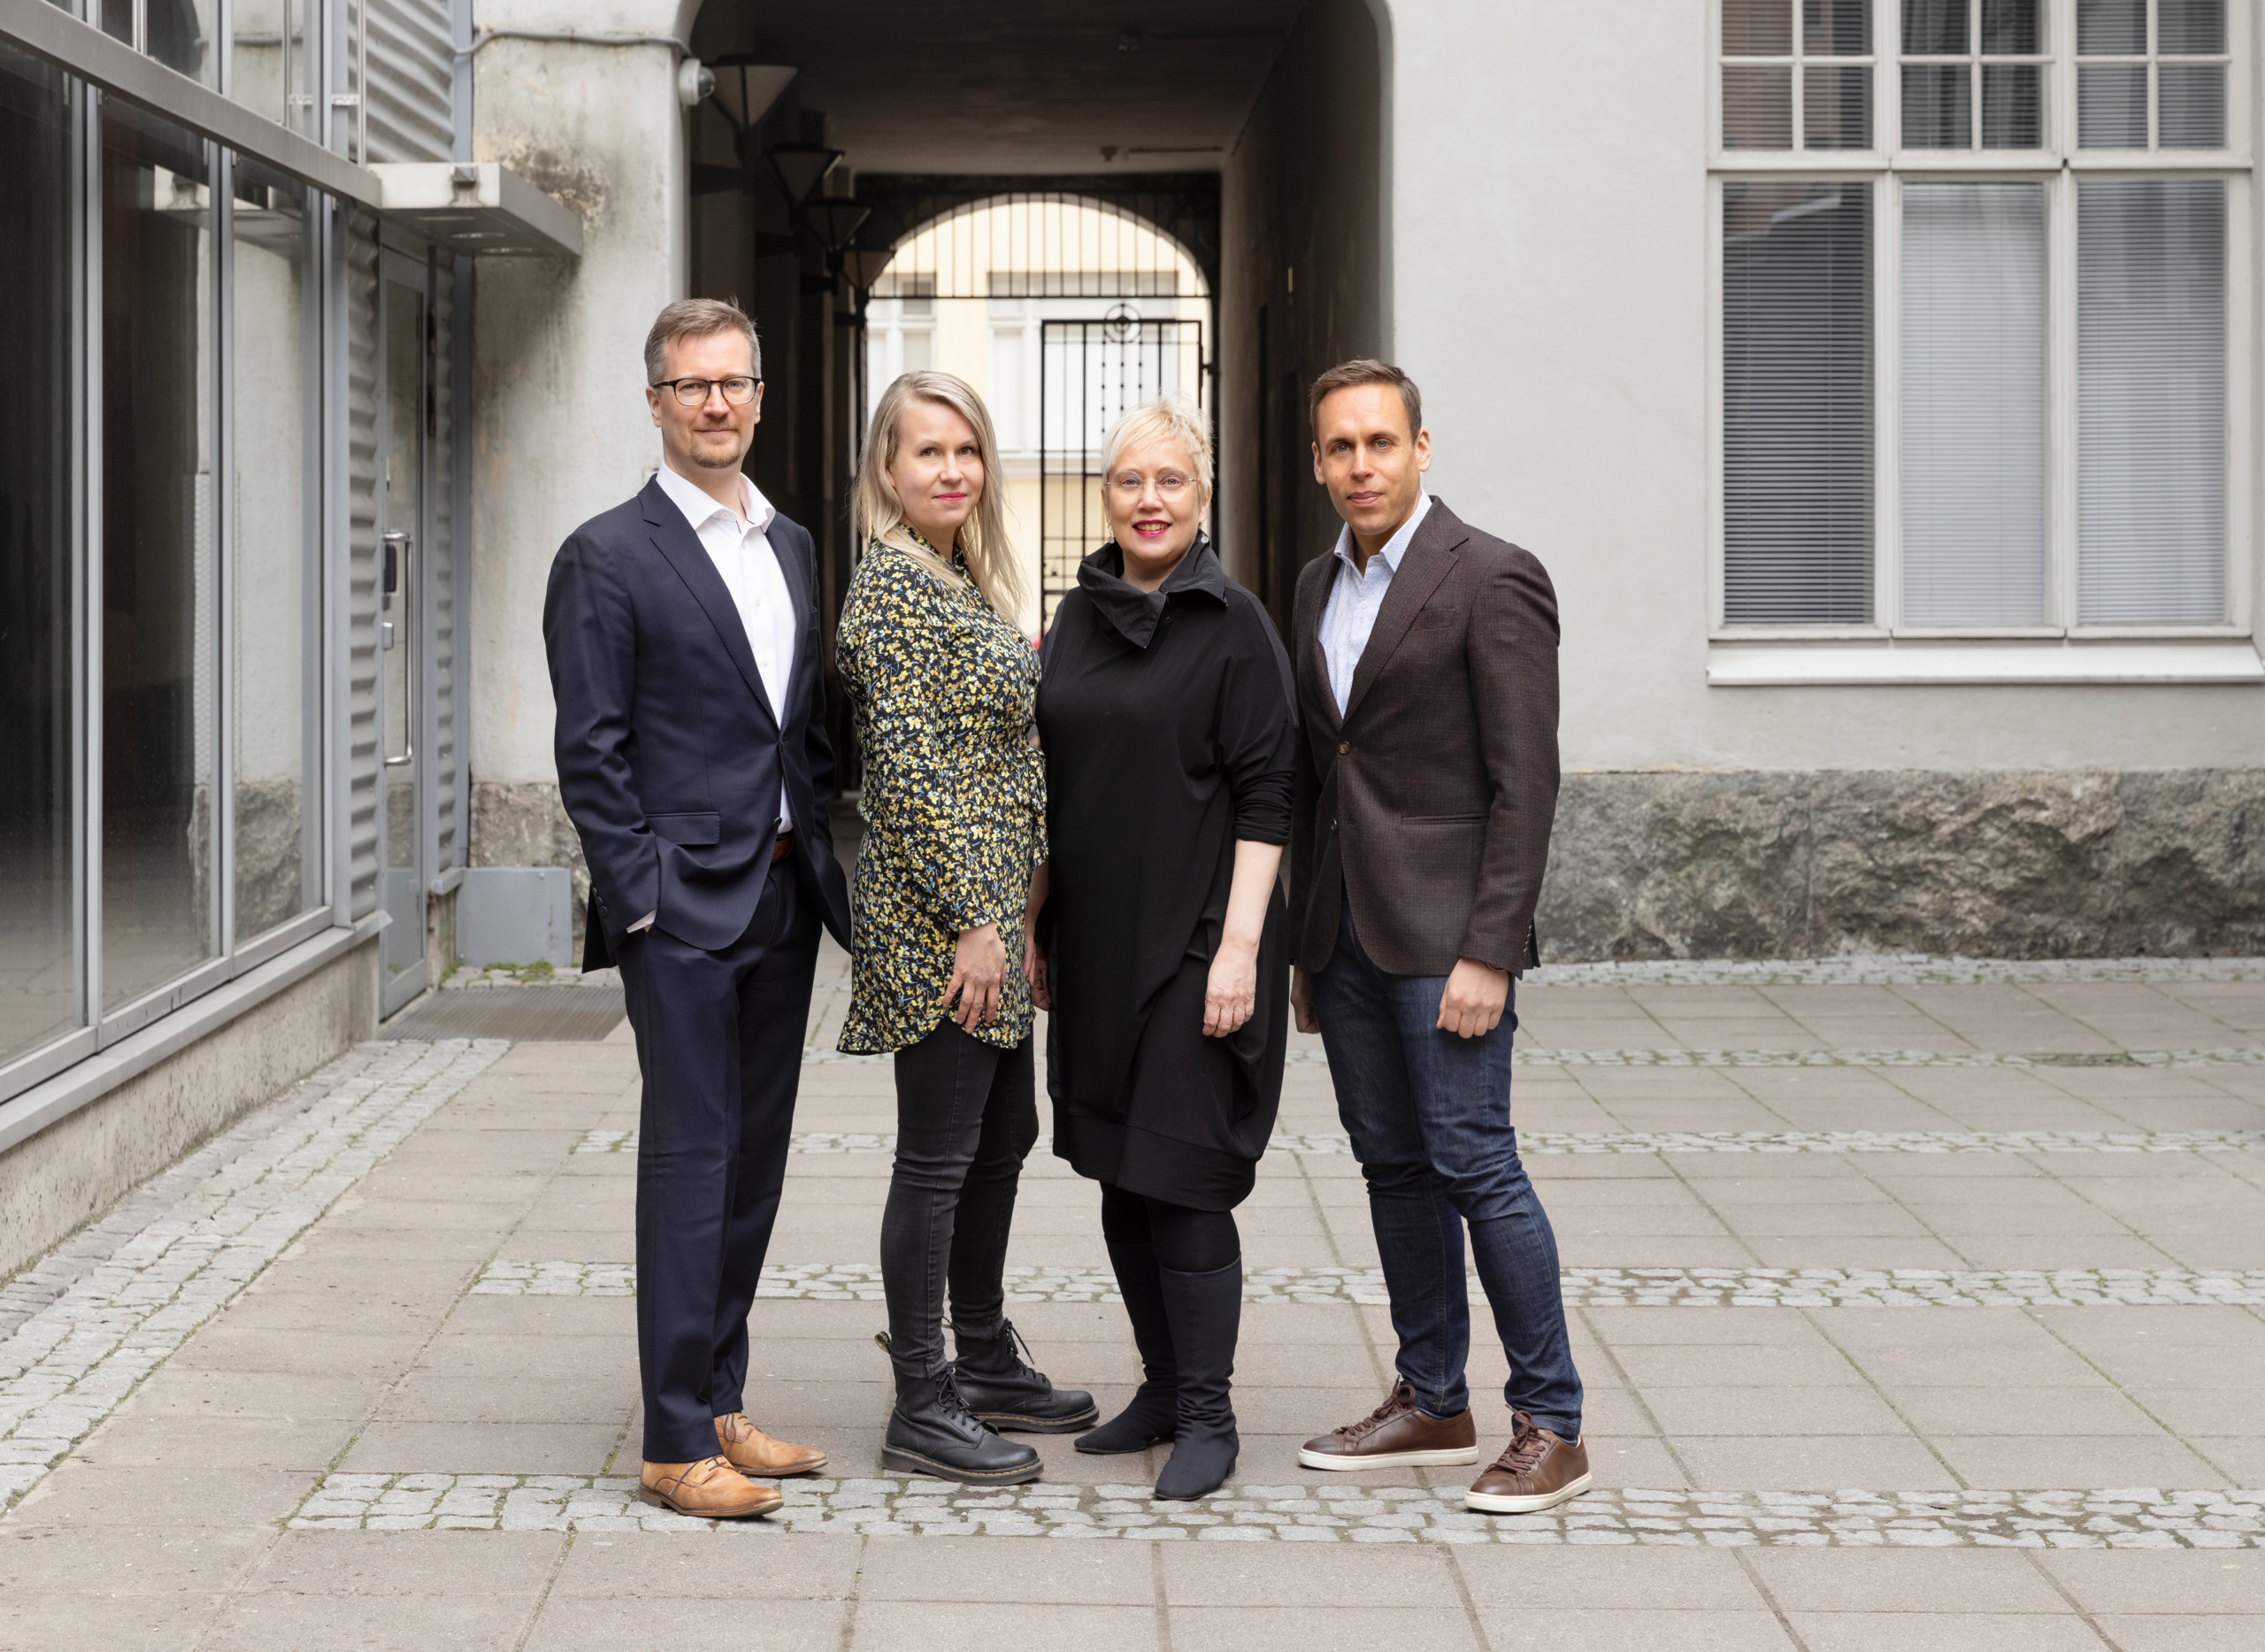 The foundation’s operations are run by CEO Jussi Nissilä, Head of Communications Annu Griñan, Head of Programmes Anna-Maija Aalto and Director of Administration Juha Post.